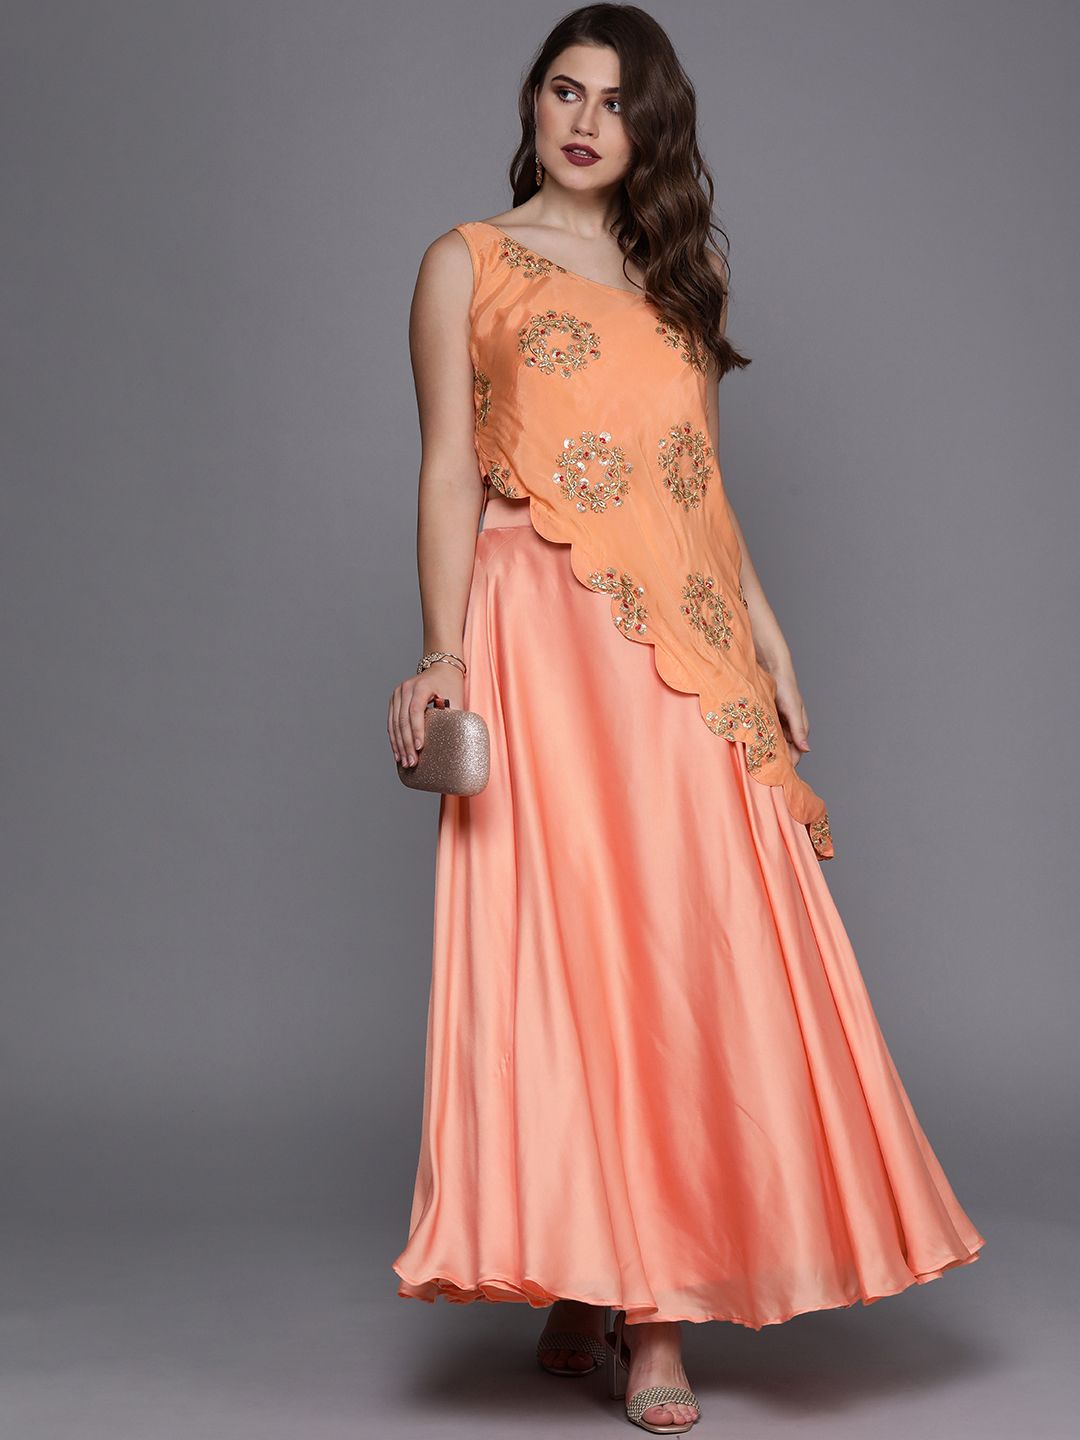 EthnoVogue Peach-Coloured Embellished Made to Measure Lehenga with Blouse & Cape Price in India